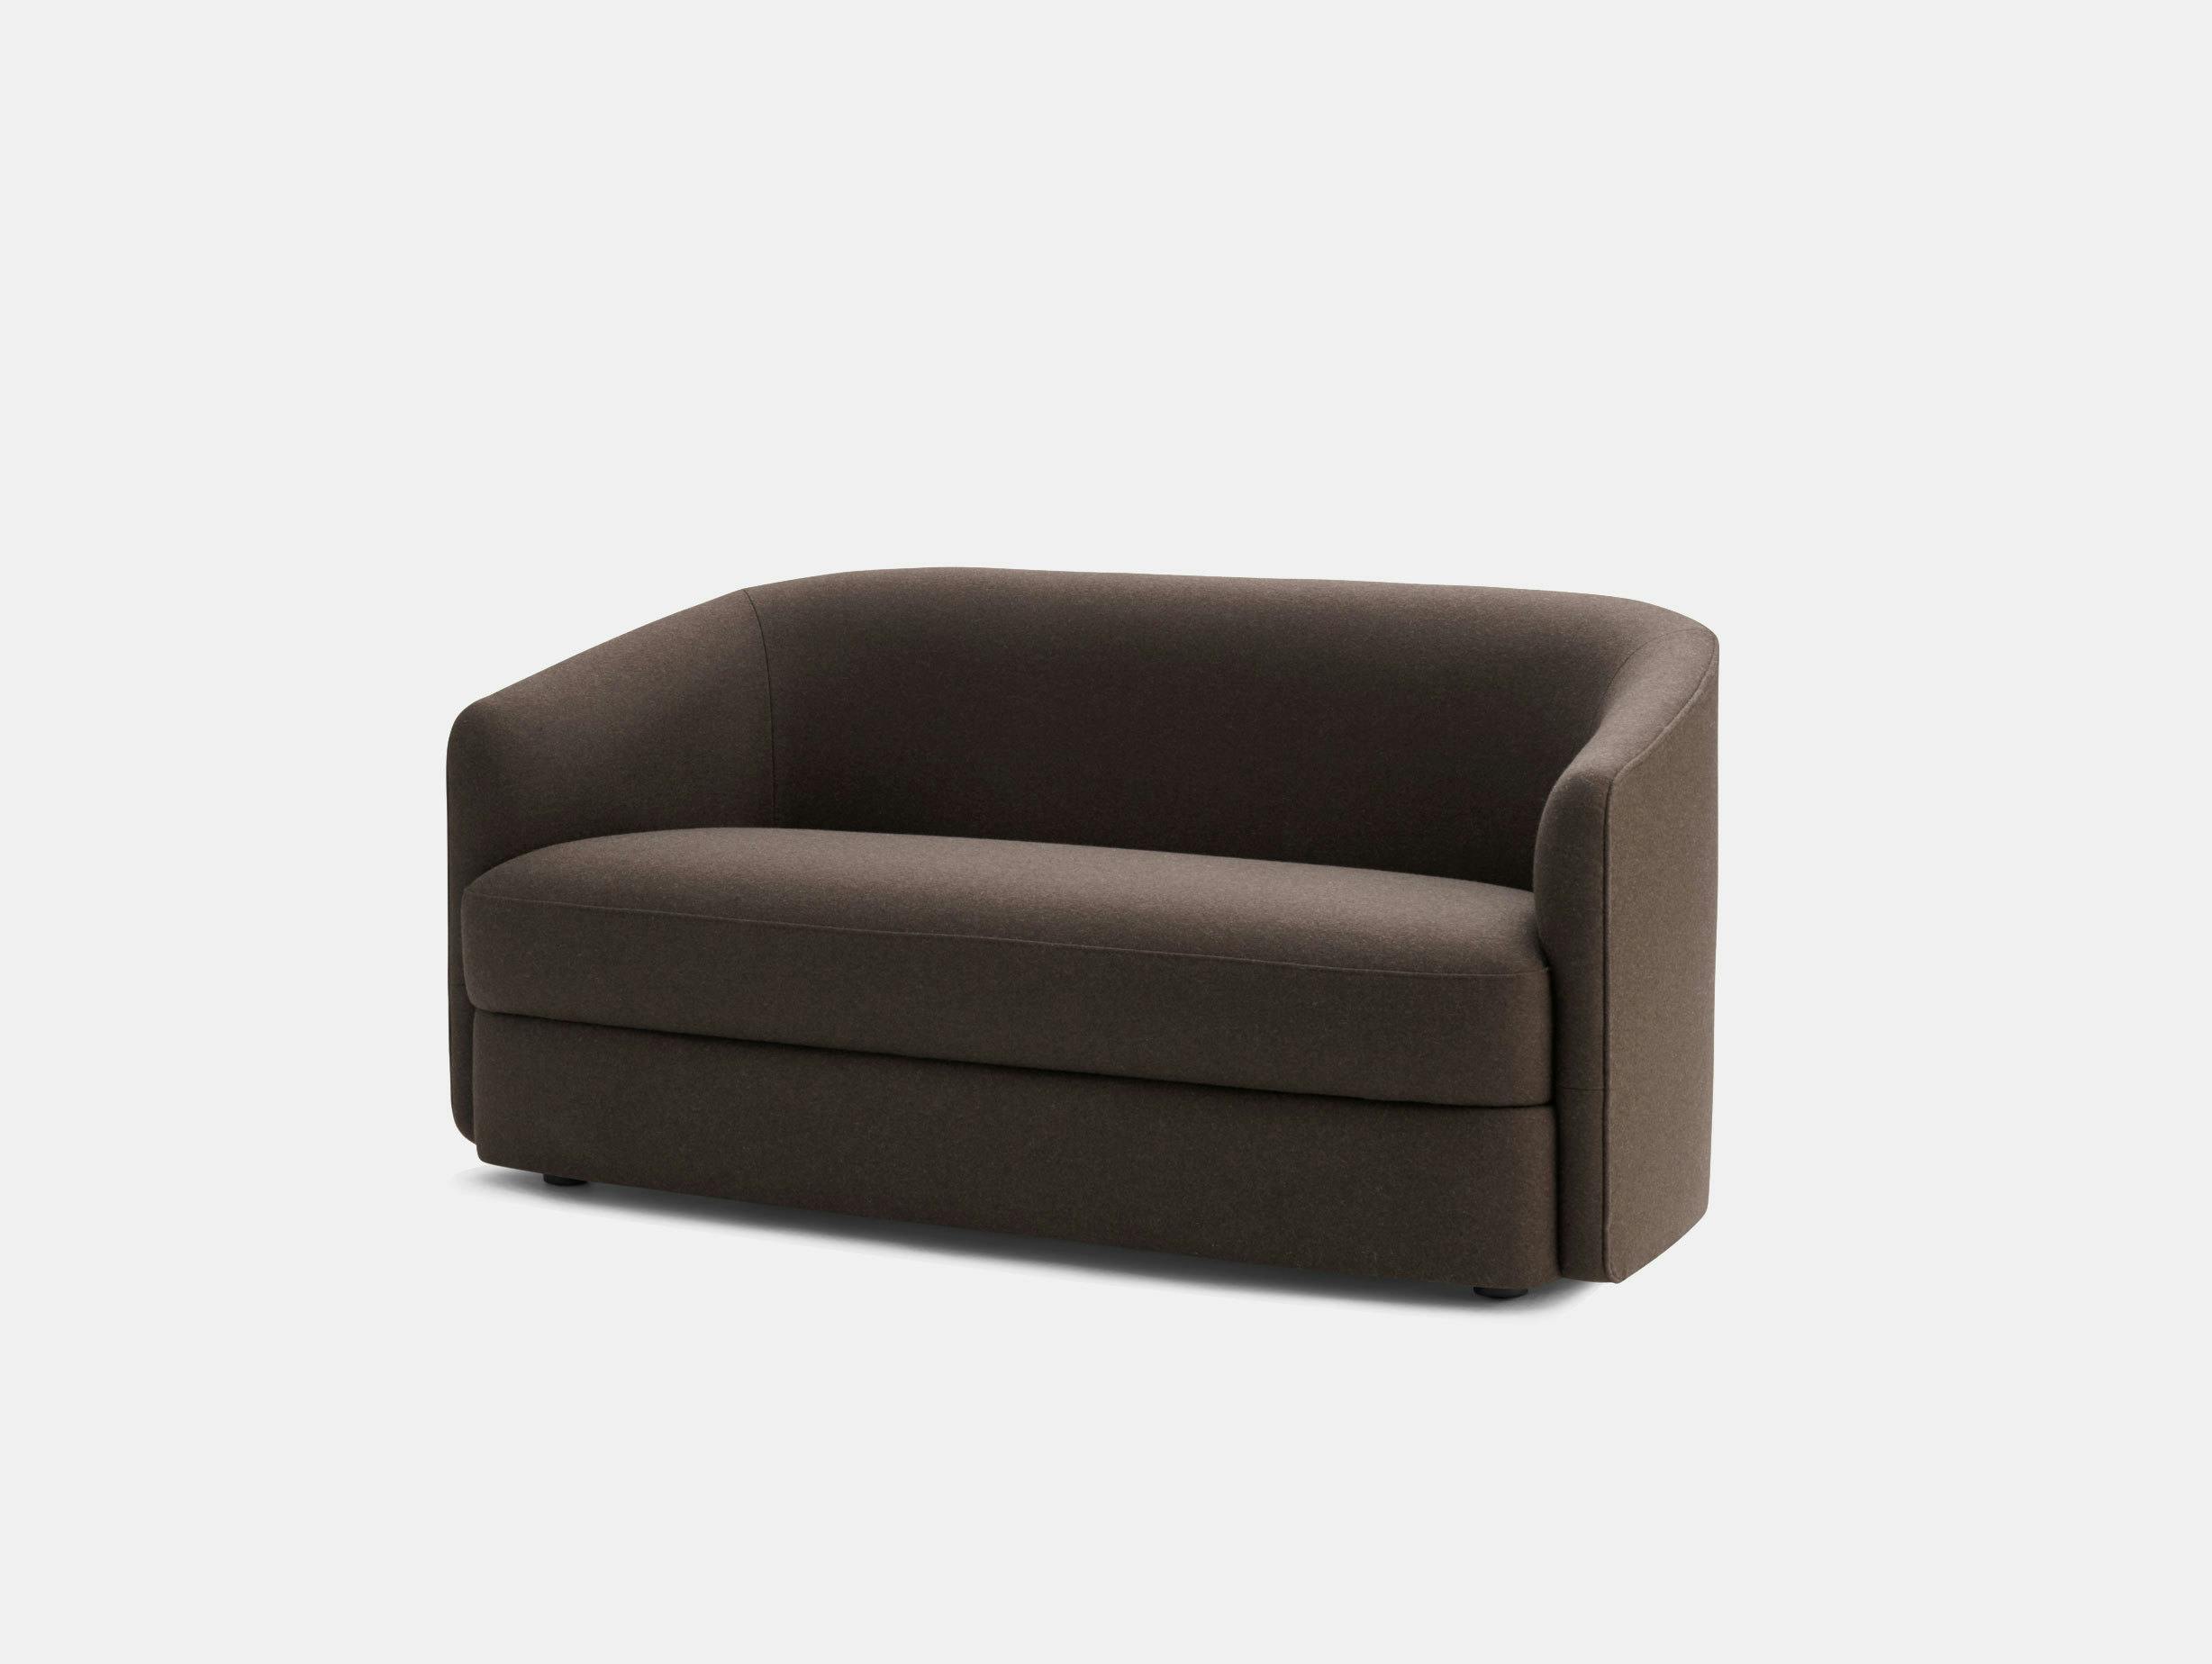 New Works Covent Sofa Two Seater Kvadrat Divina MD 363